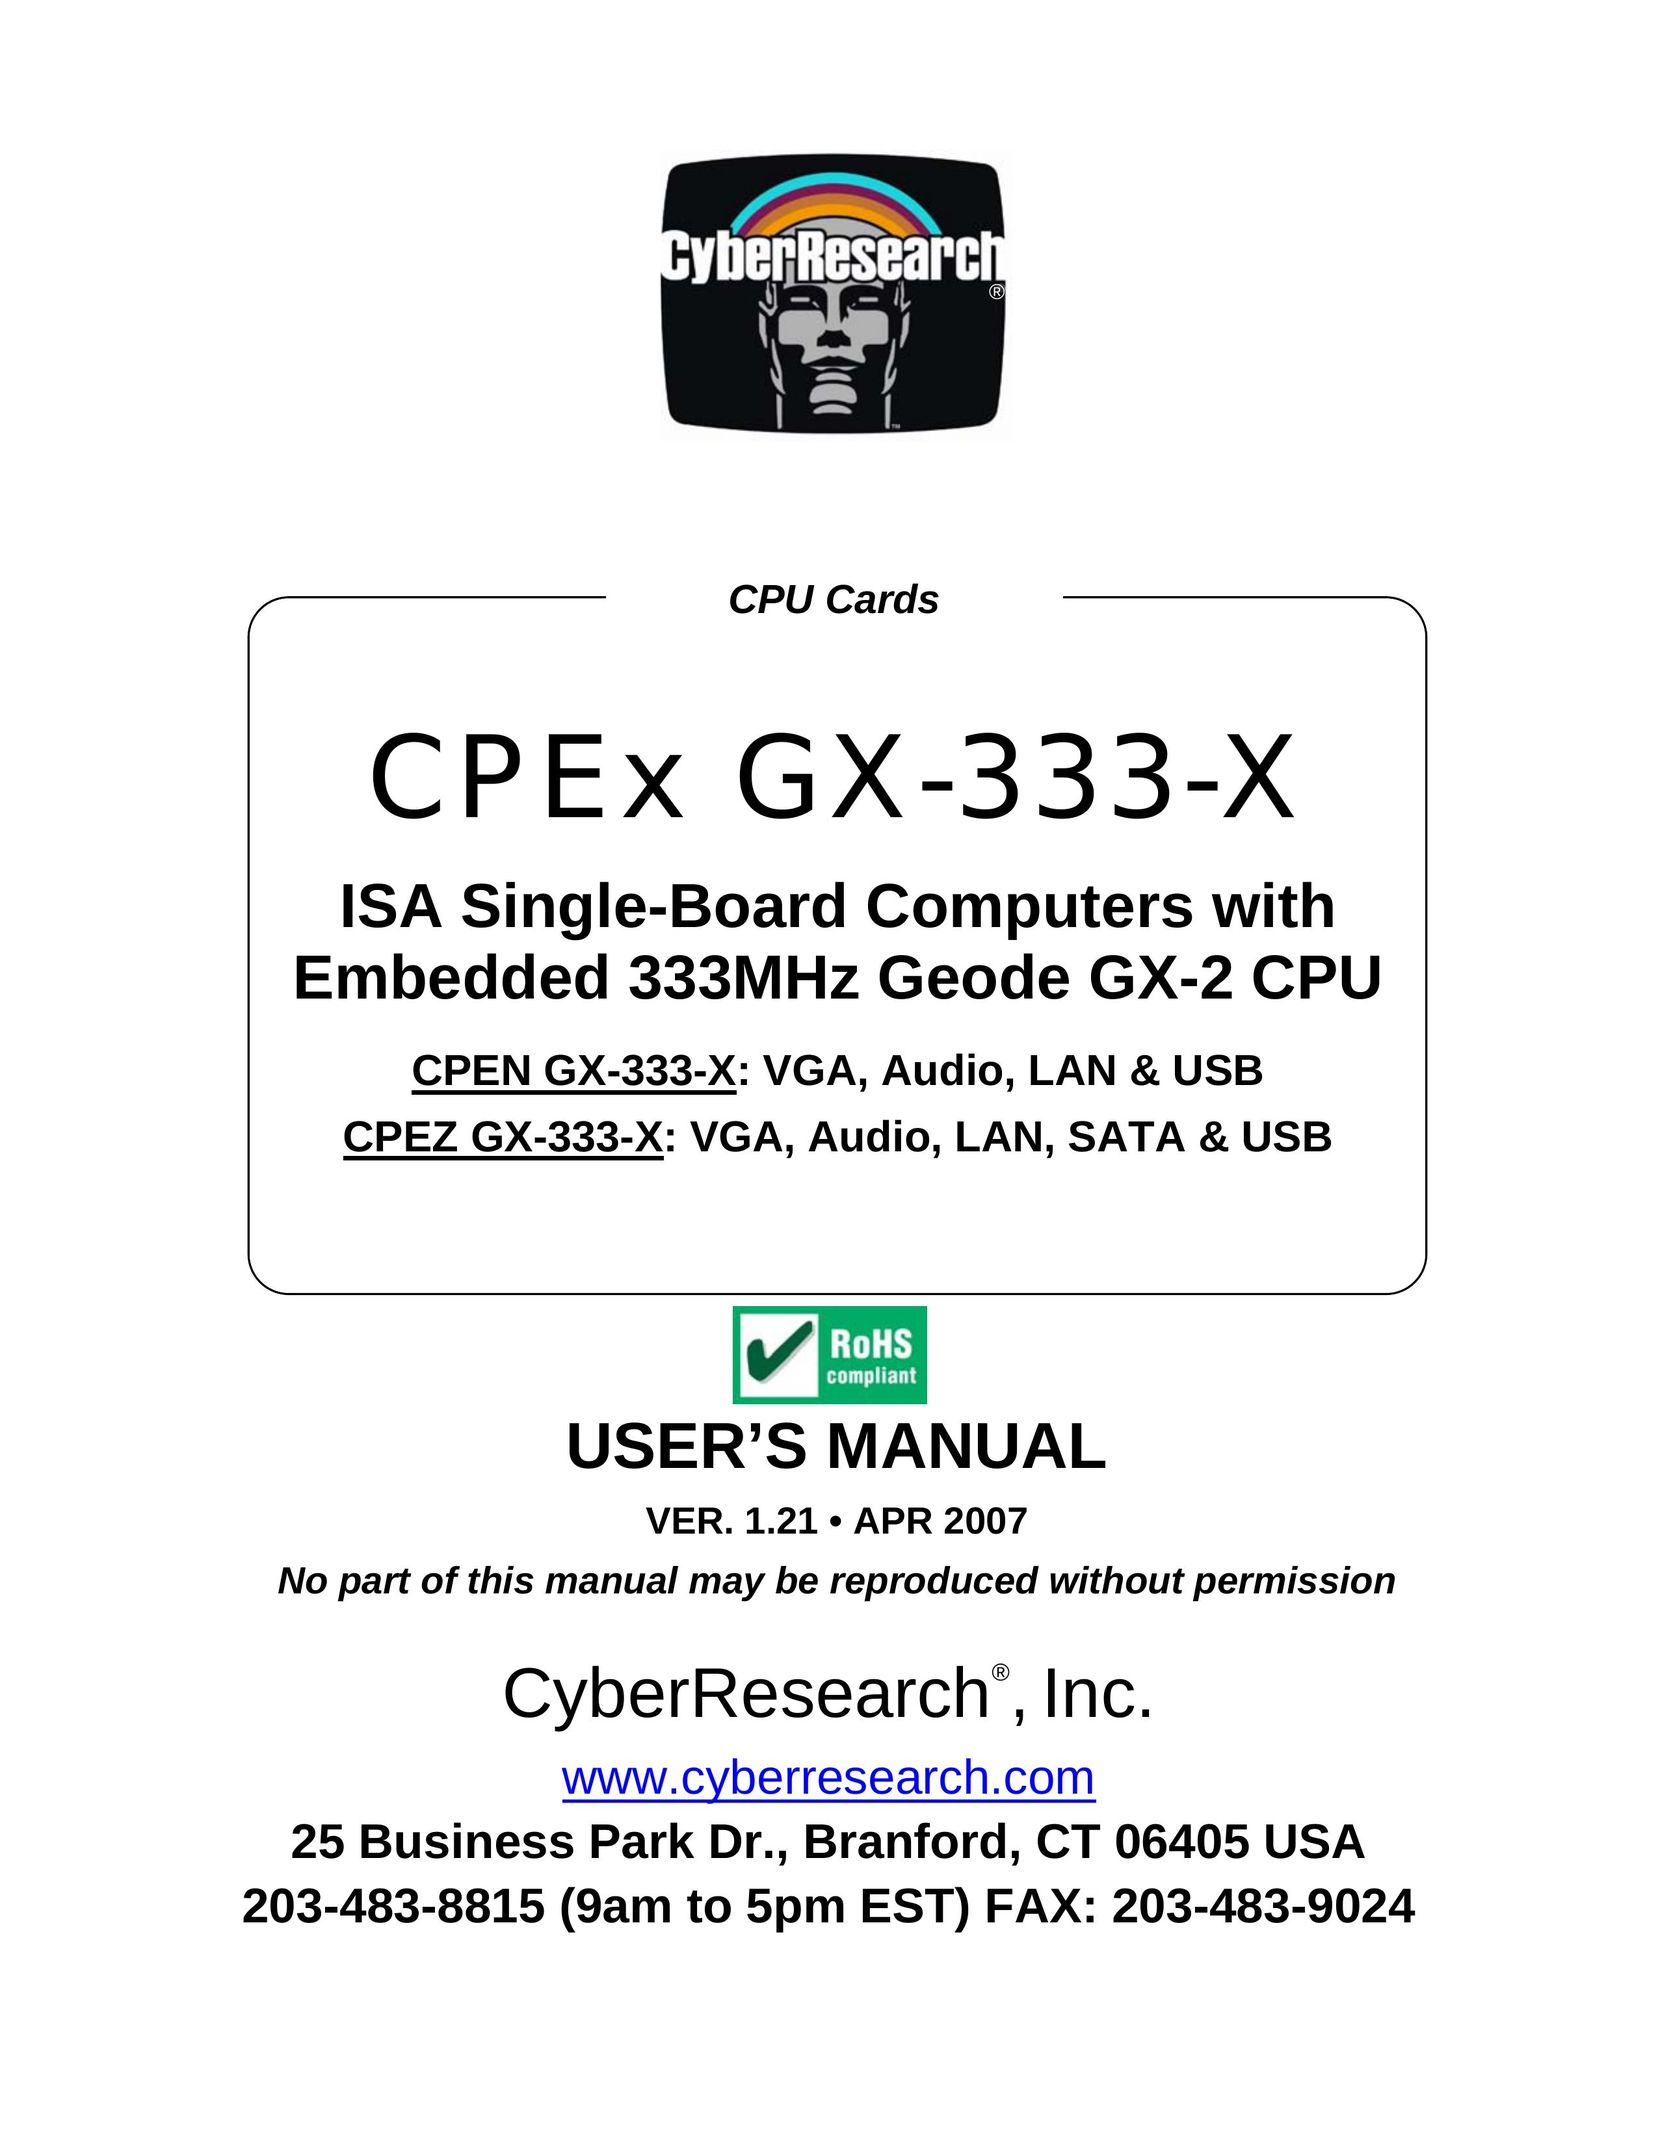 CyberResearch CPEN GX-333-X Personal Computer User Manual